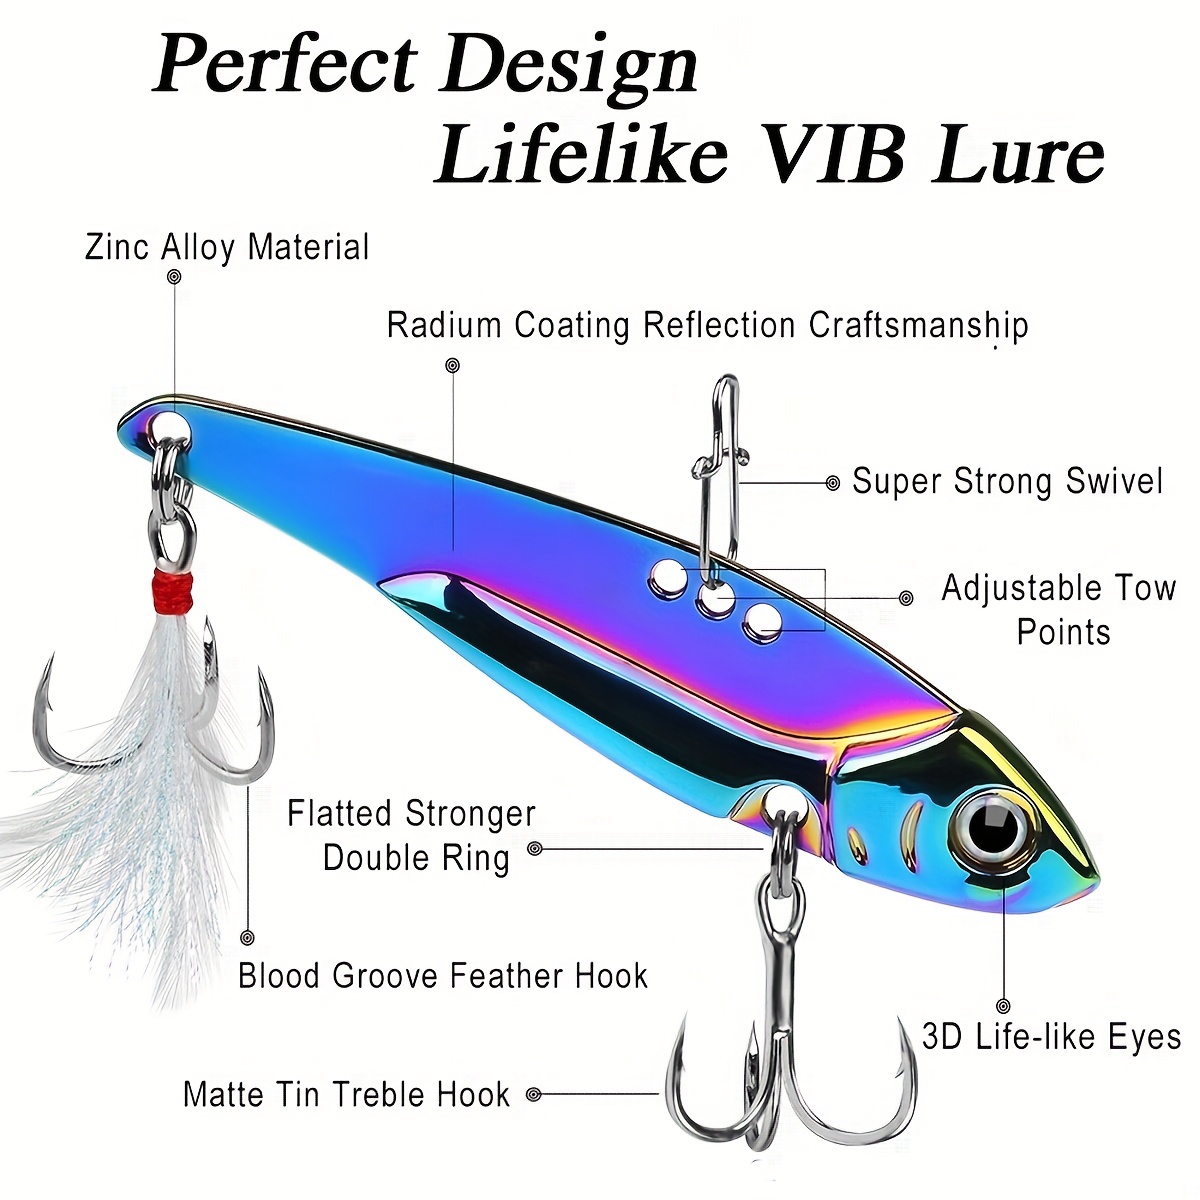 5g/7g/10g/15g/20g S-Shaped Leech Metal Sequin Long-Range Cast Iron Plate Bait  Fishing Lure - China Fishing Lure and Bait price